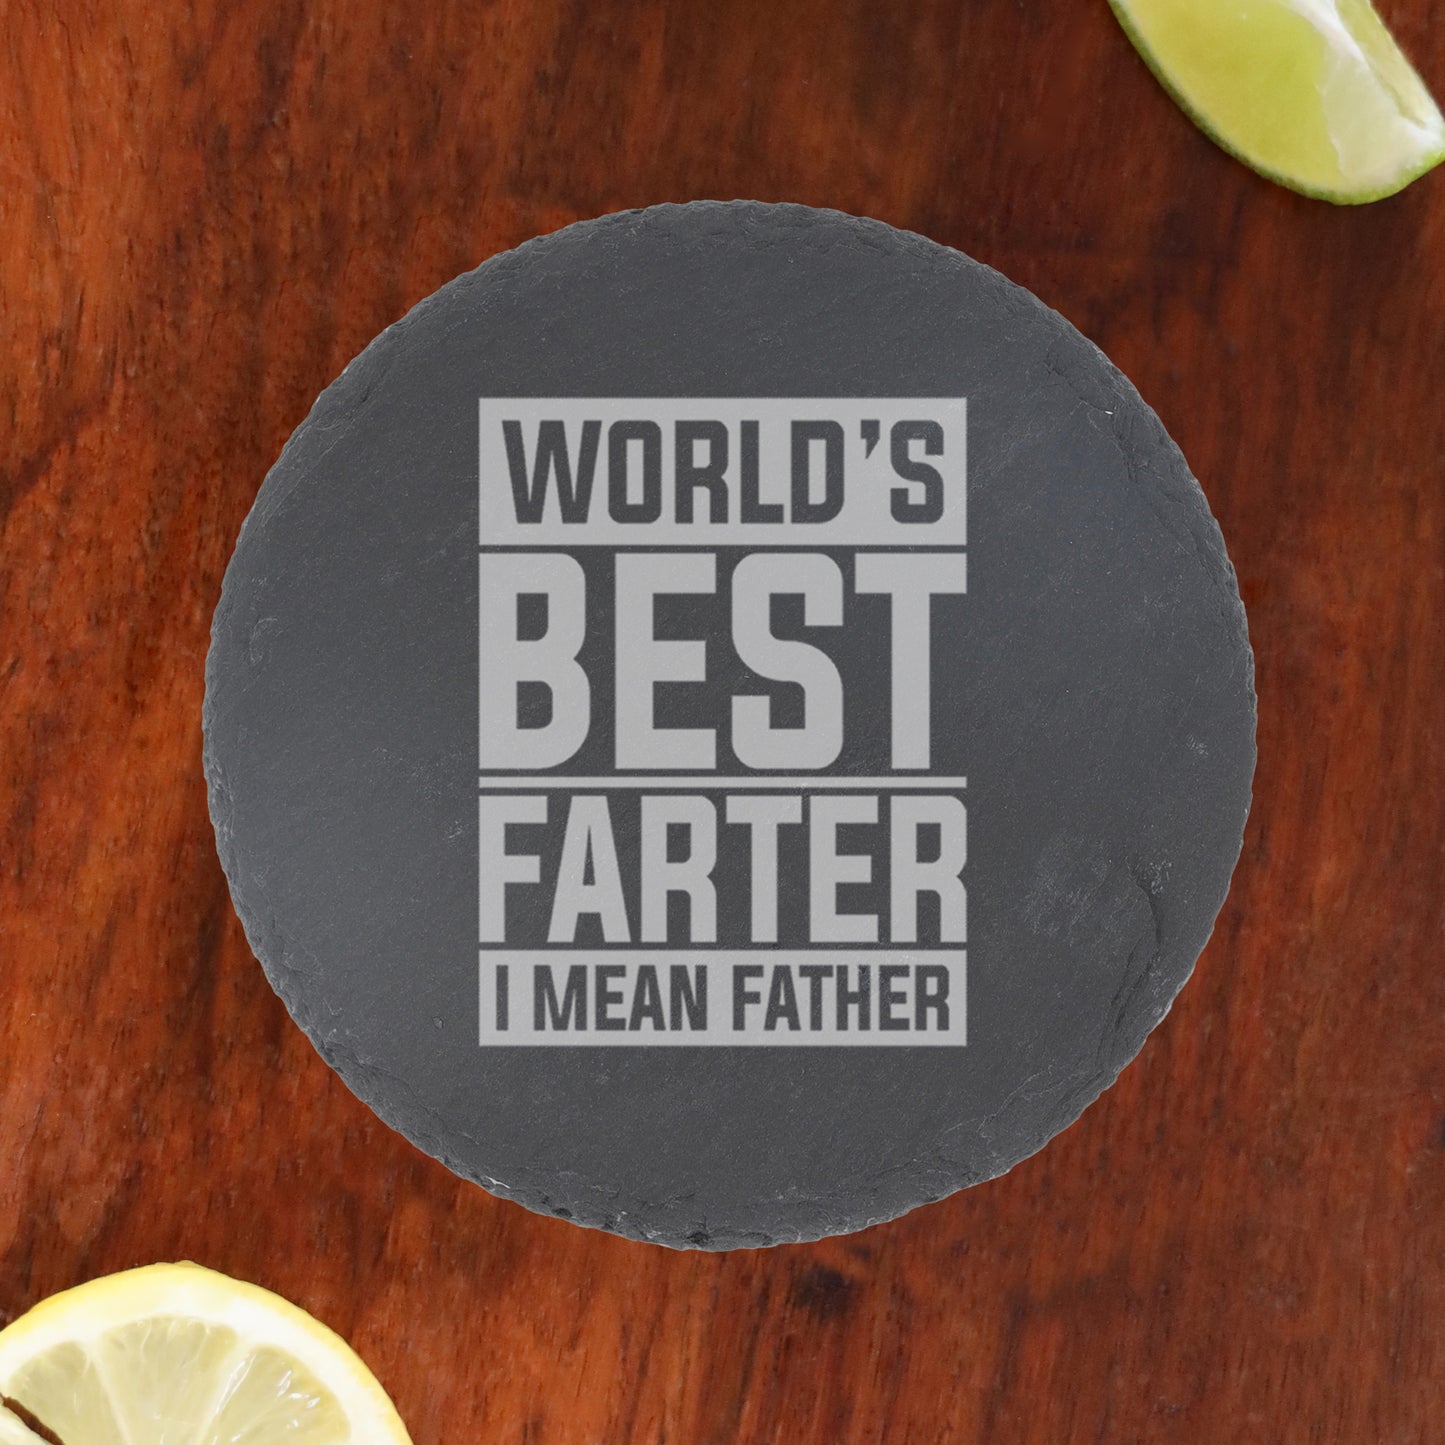 Worlds Best Farter I Mean Father Engraved Beer Glass and/or Coaster Set  - Always Looking Good - Block Style Round Coaster Only  